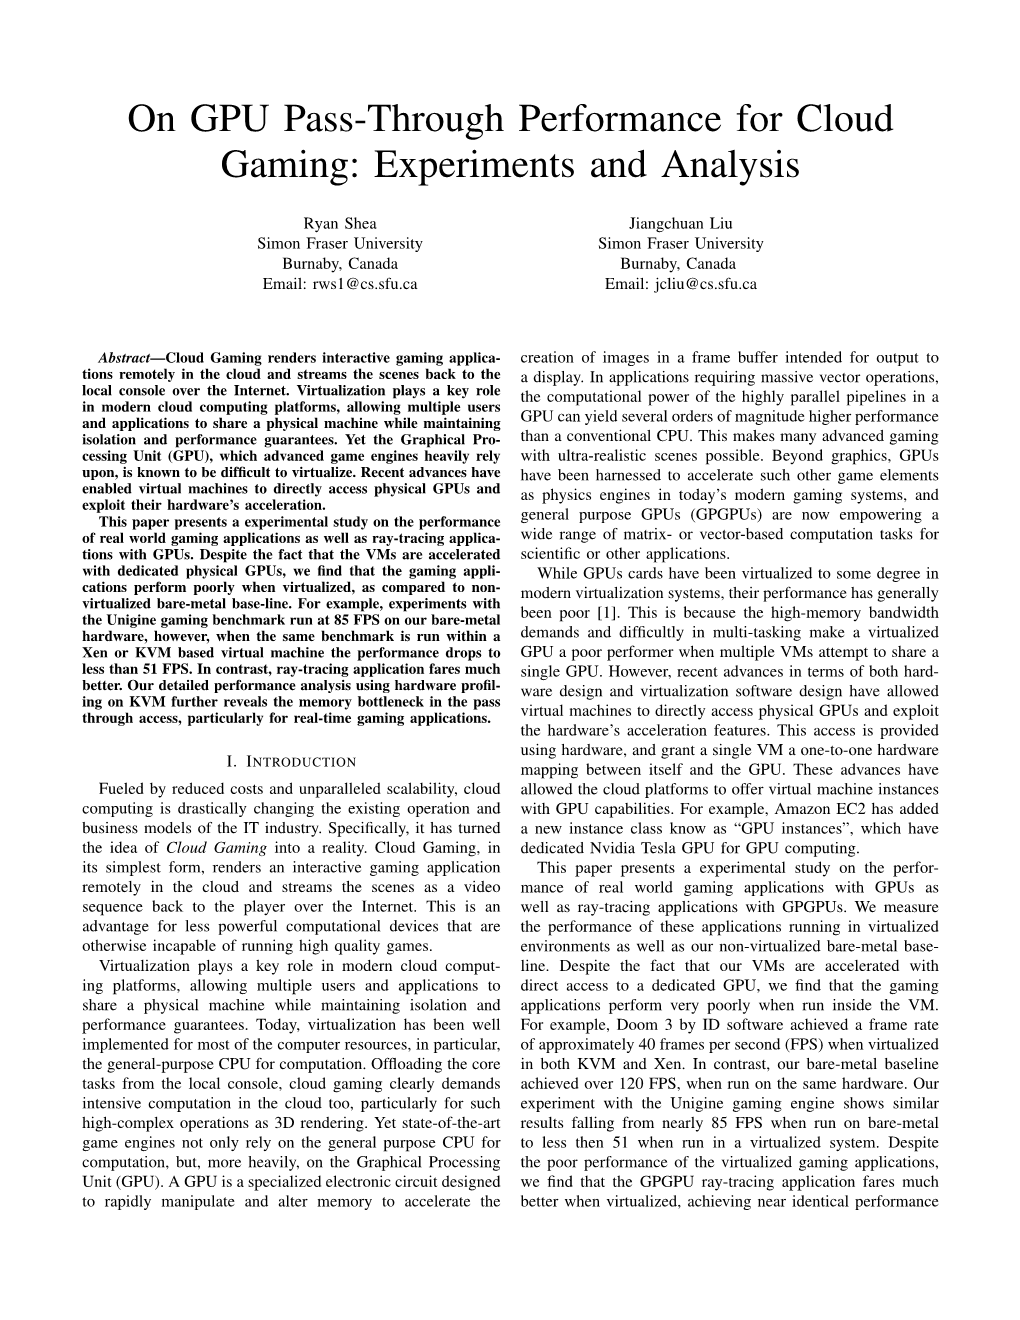 On GPU Pass-Through Performance for Cloud Gaming: Experiments and Analysis